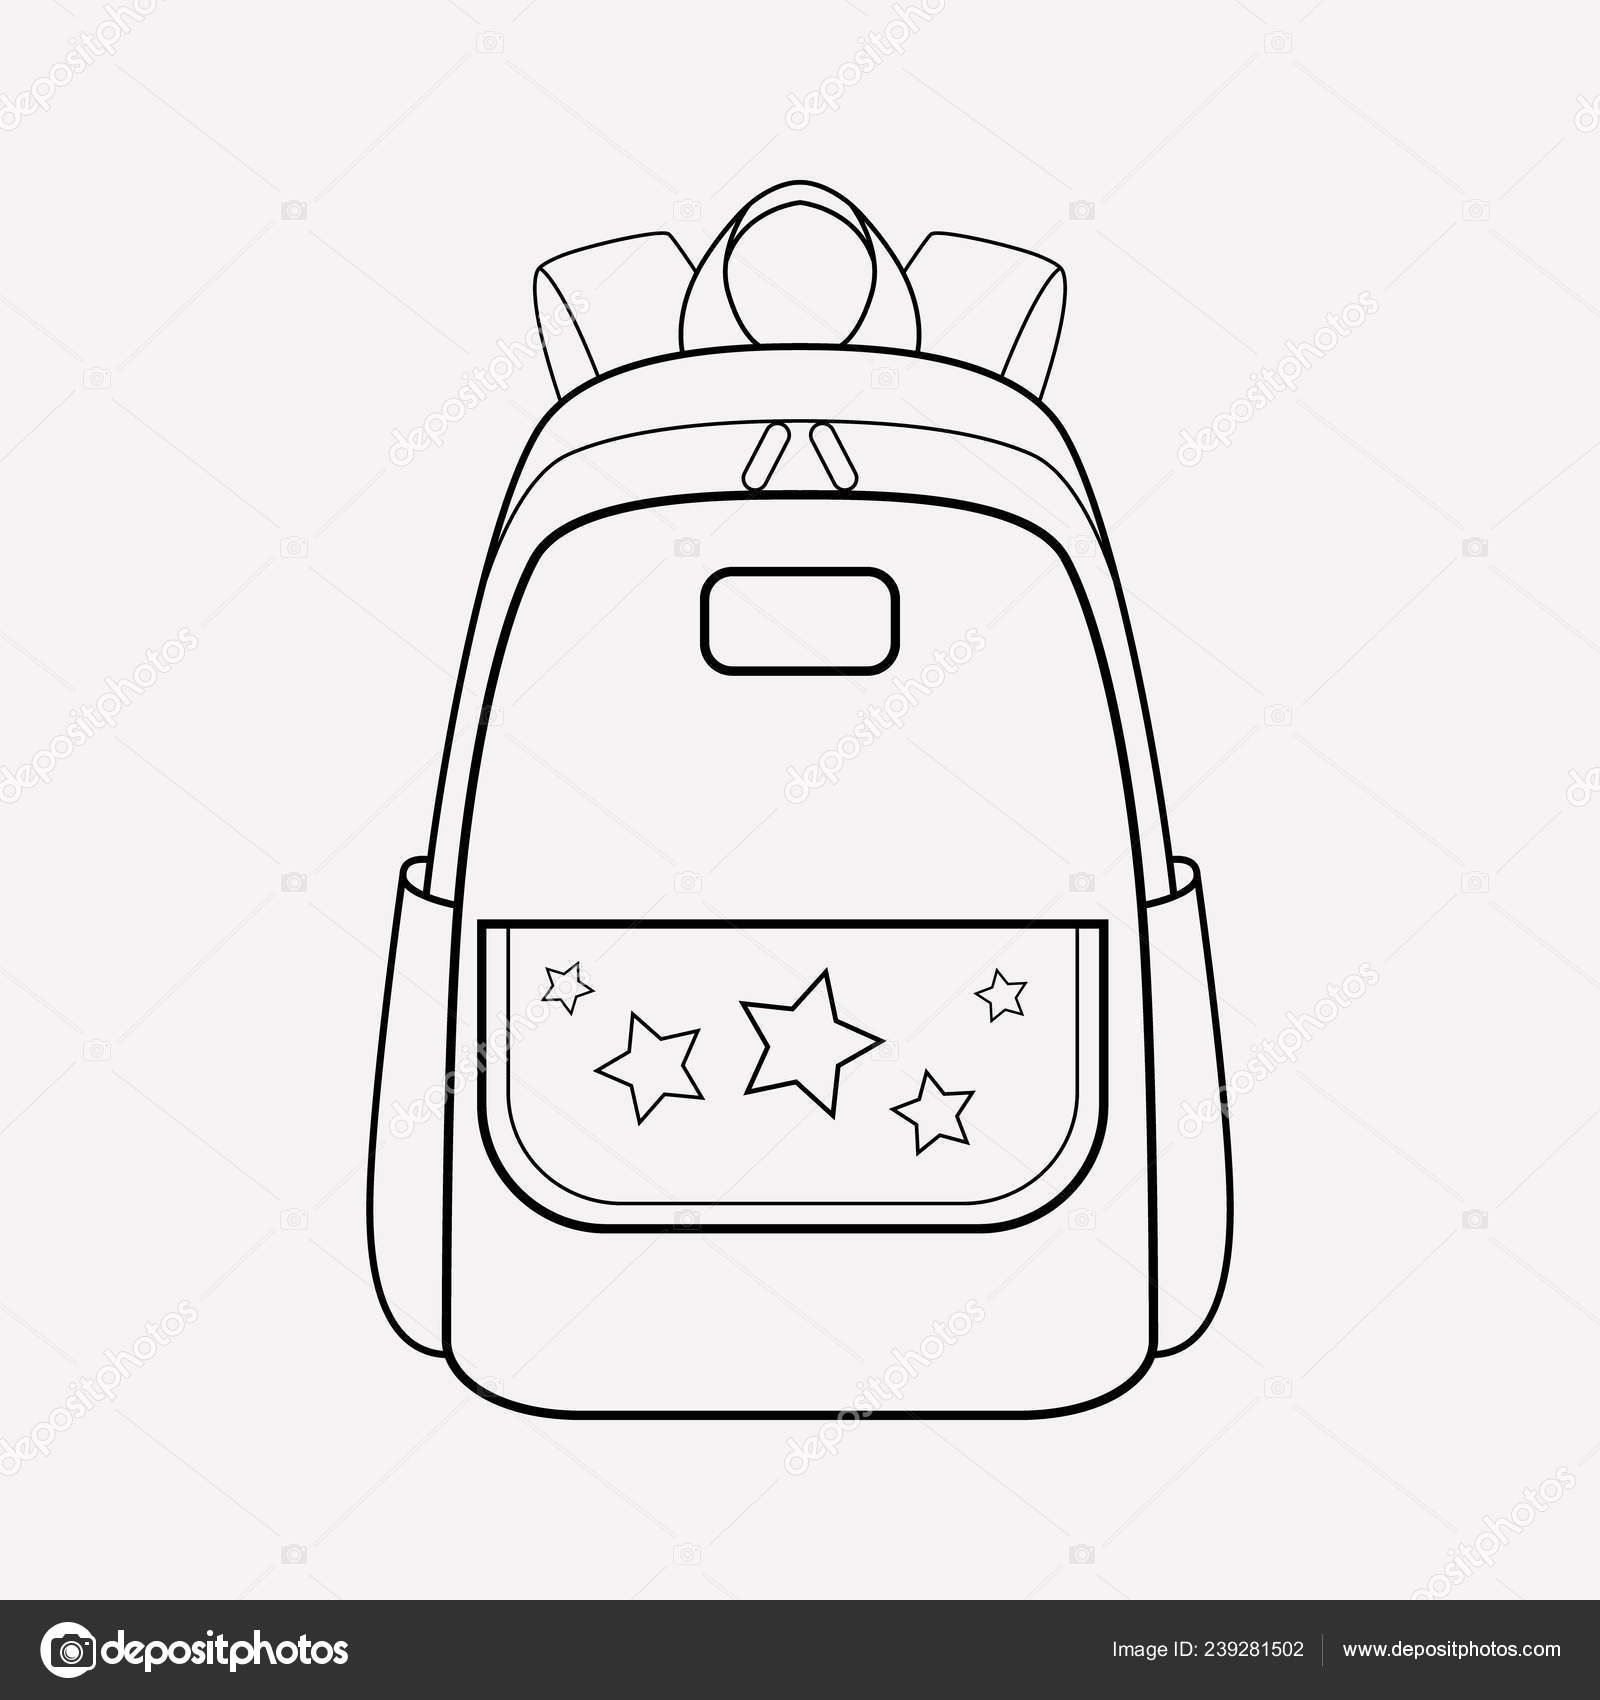 School bag icon with outline style and pixel perfect base. Suitable for  website design, logo, app